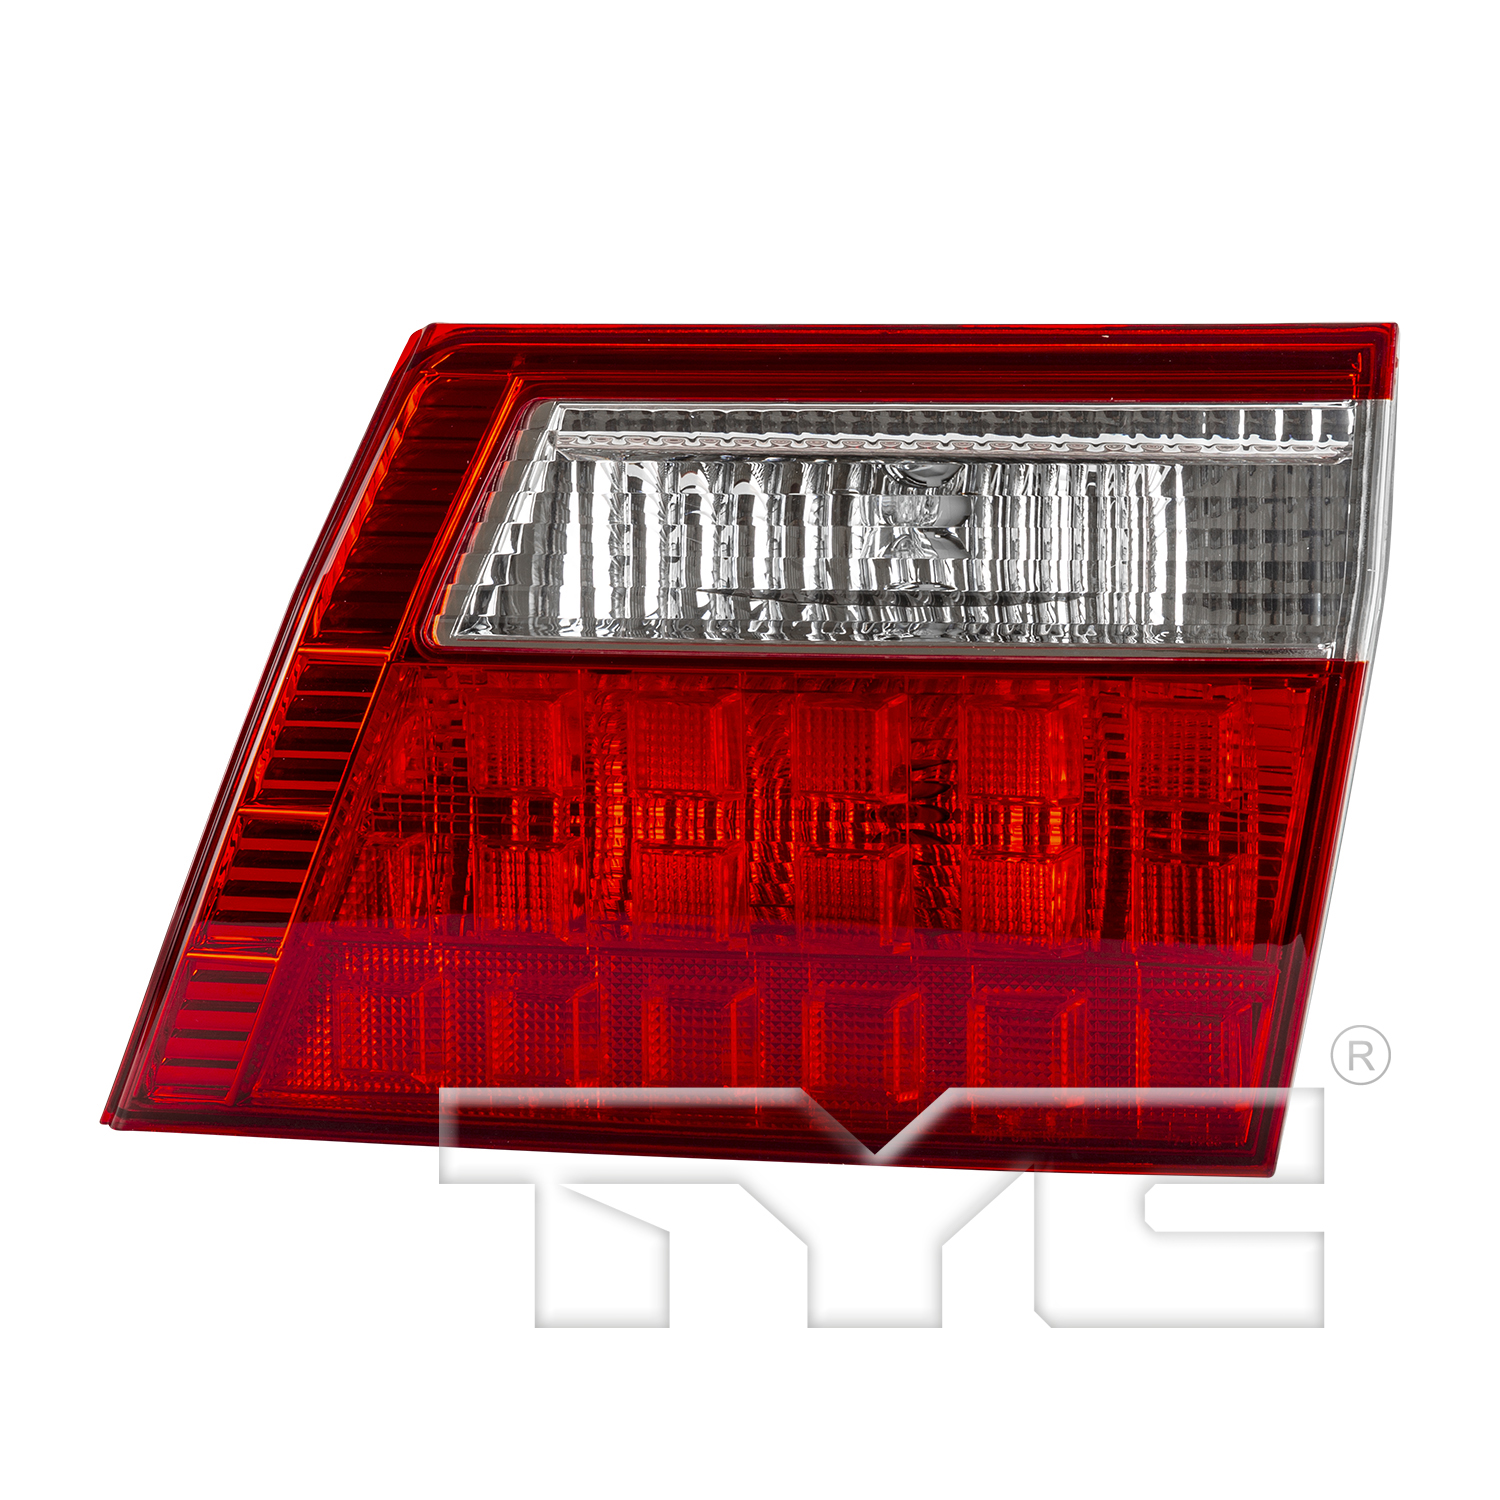 Aftermarket TAILLIGHTS for HONDA - ODYSSEY, ODYSSEY,05-07,RT Taillamp assy